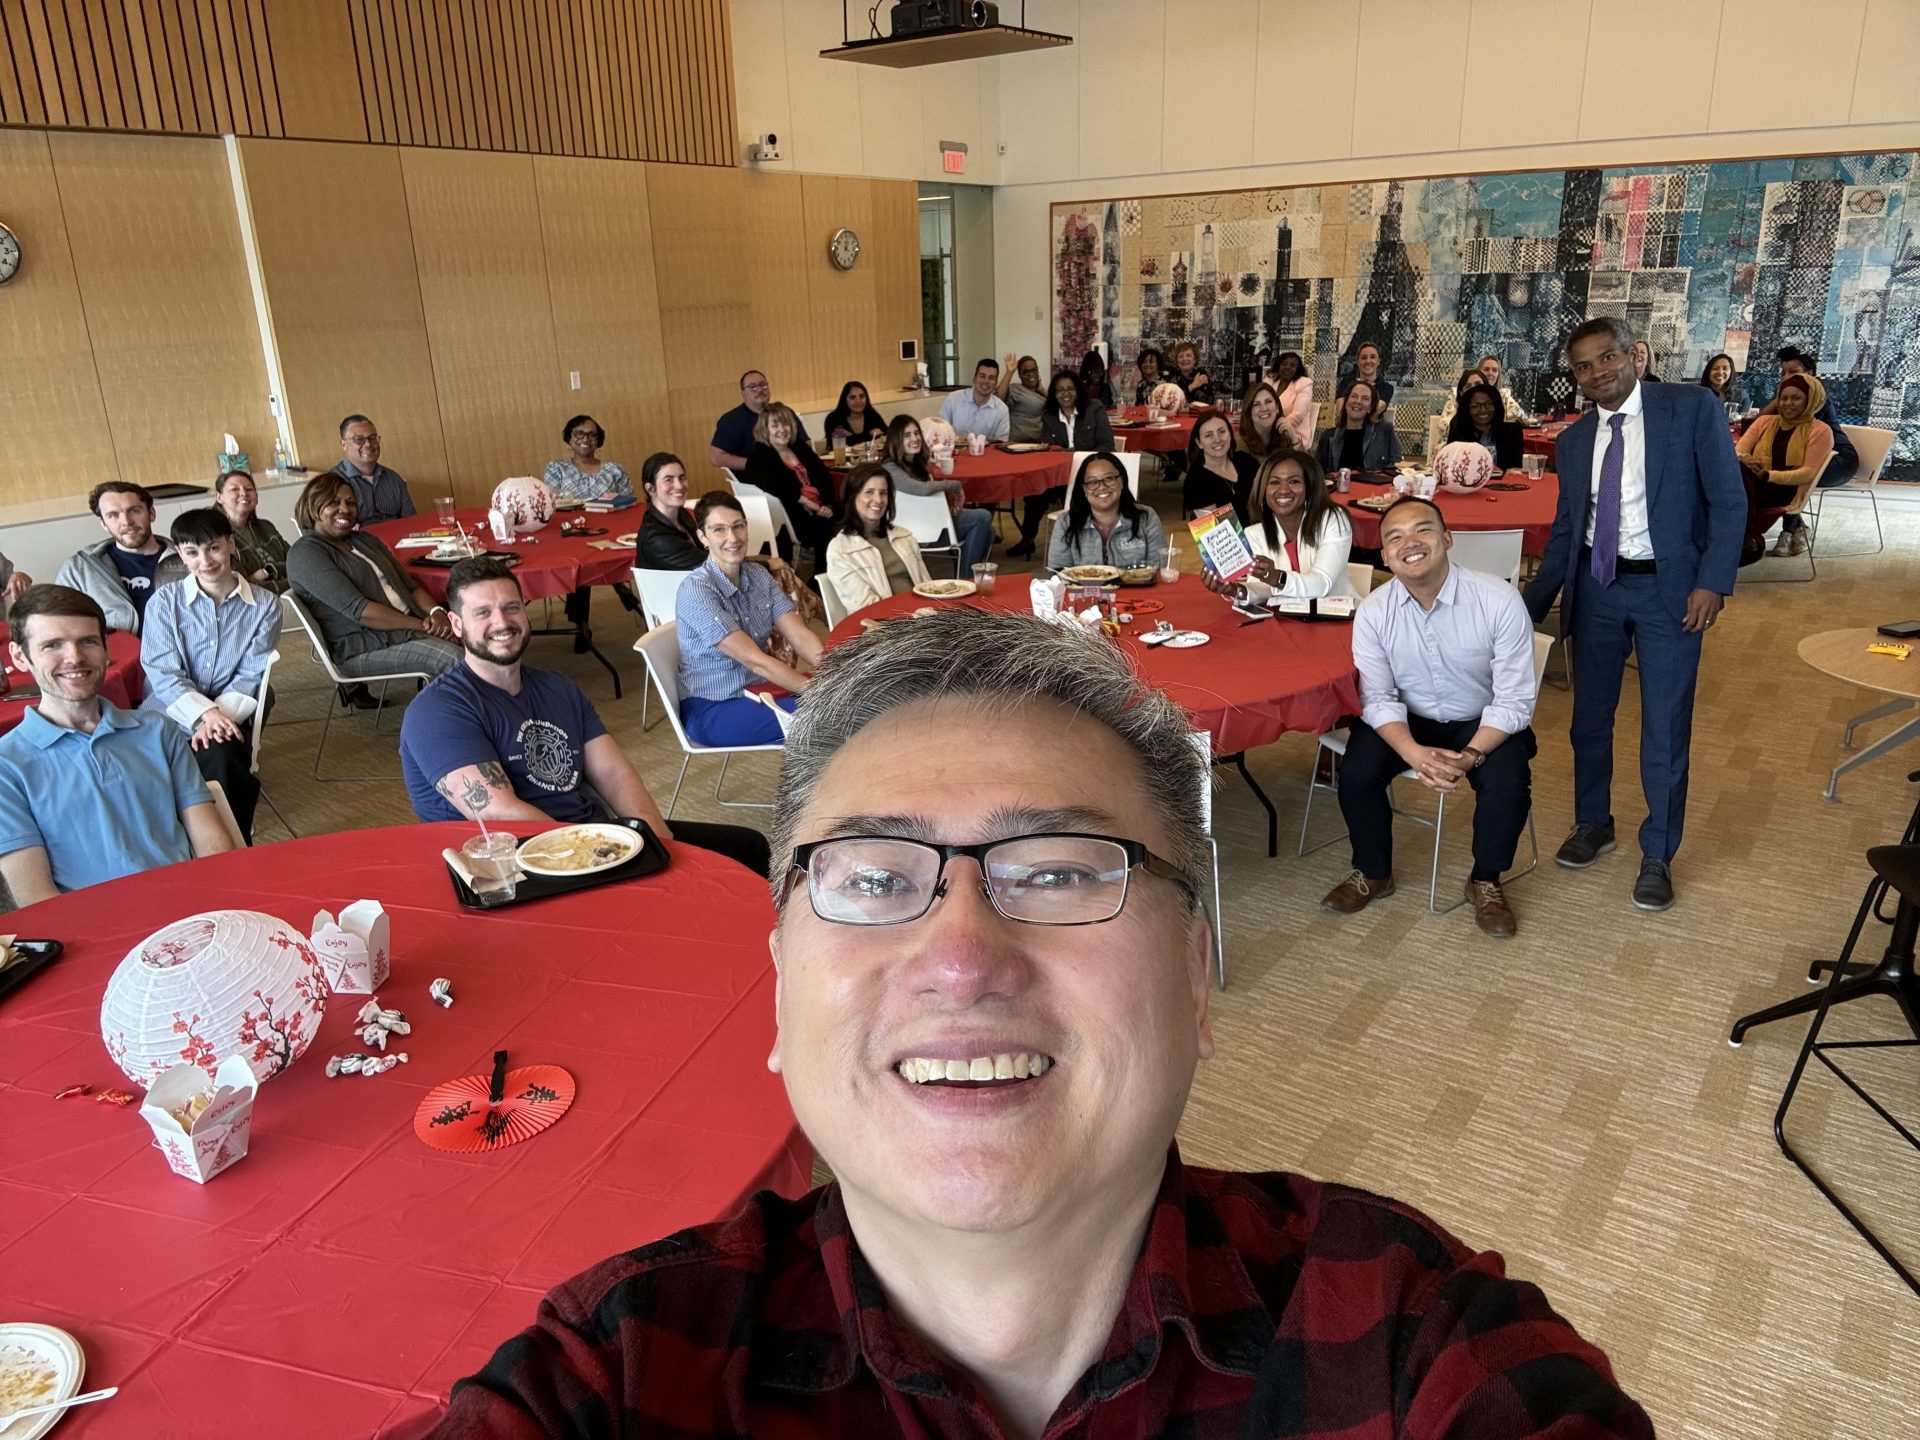 Curtis Chin, a Chinese-American author, takes a selfie with a room full of Kresge staff behind him.